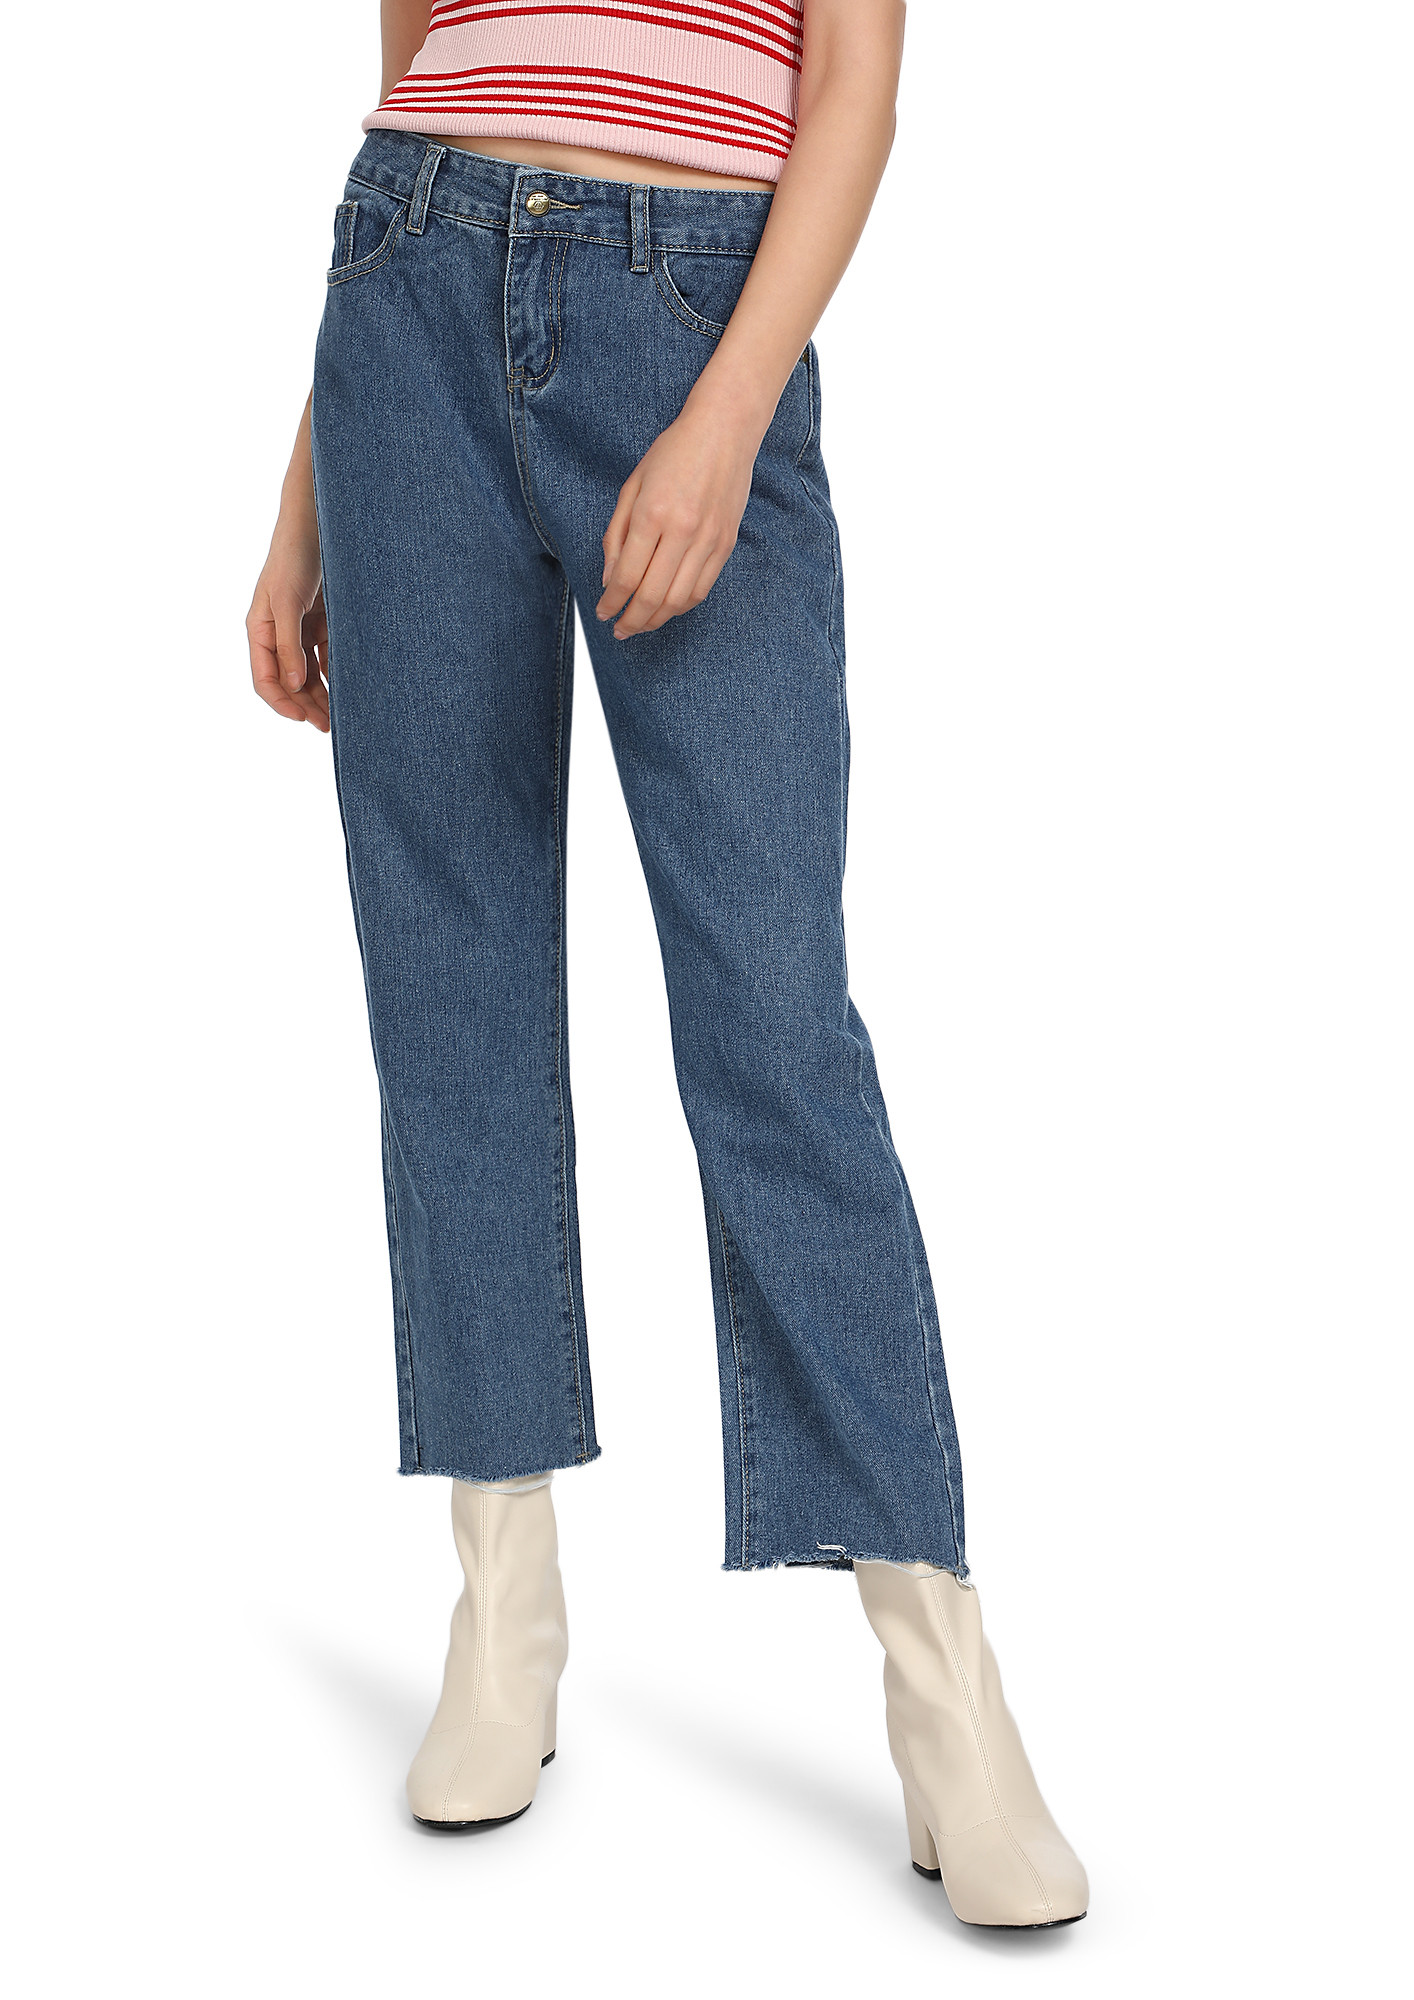 LOOKING FOR YOU DARK BLUE CROPPED DENIMS 